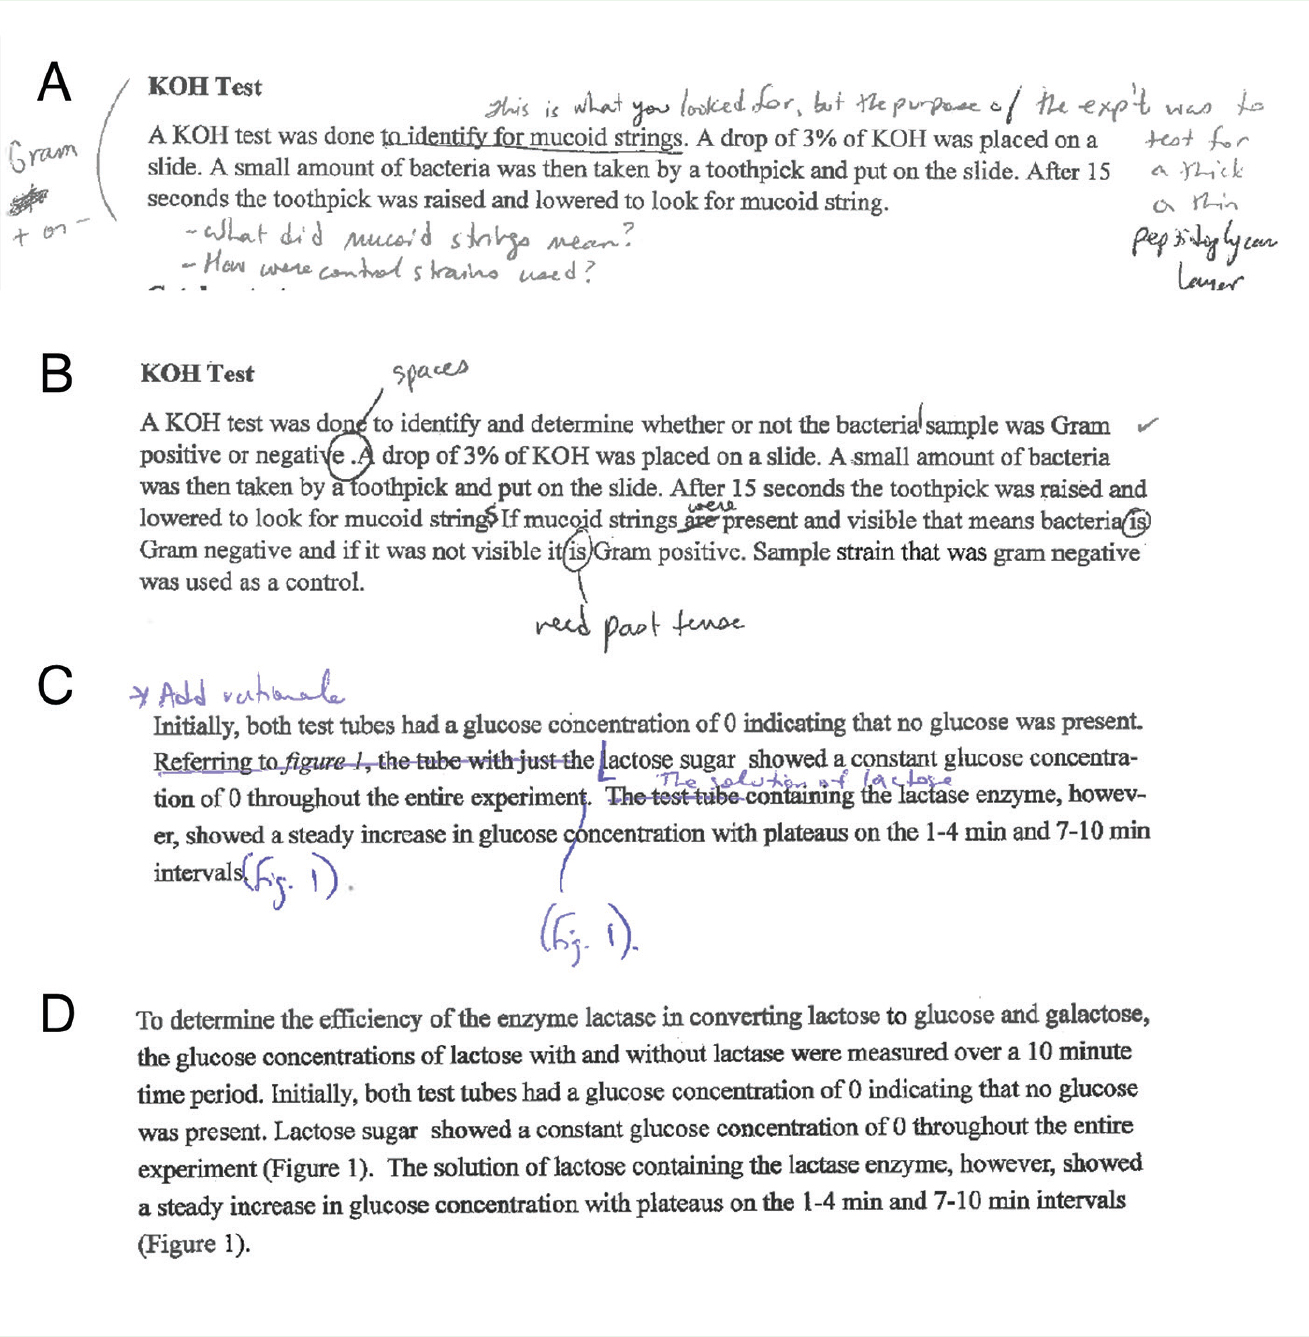 Excerpts of student reports before and after tutoring. Handwritten annotations are original notes made by graders and/or writing tutors. (A) Report 1, initial submission, (B) same paragraph, following tutoring and revision. (C) Report 2, initial submission, (D) same paragraph, following tutoring and revision.